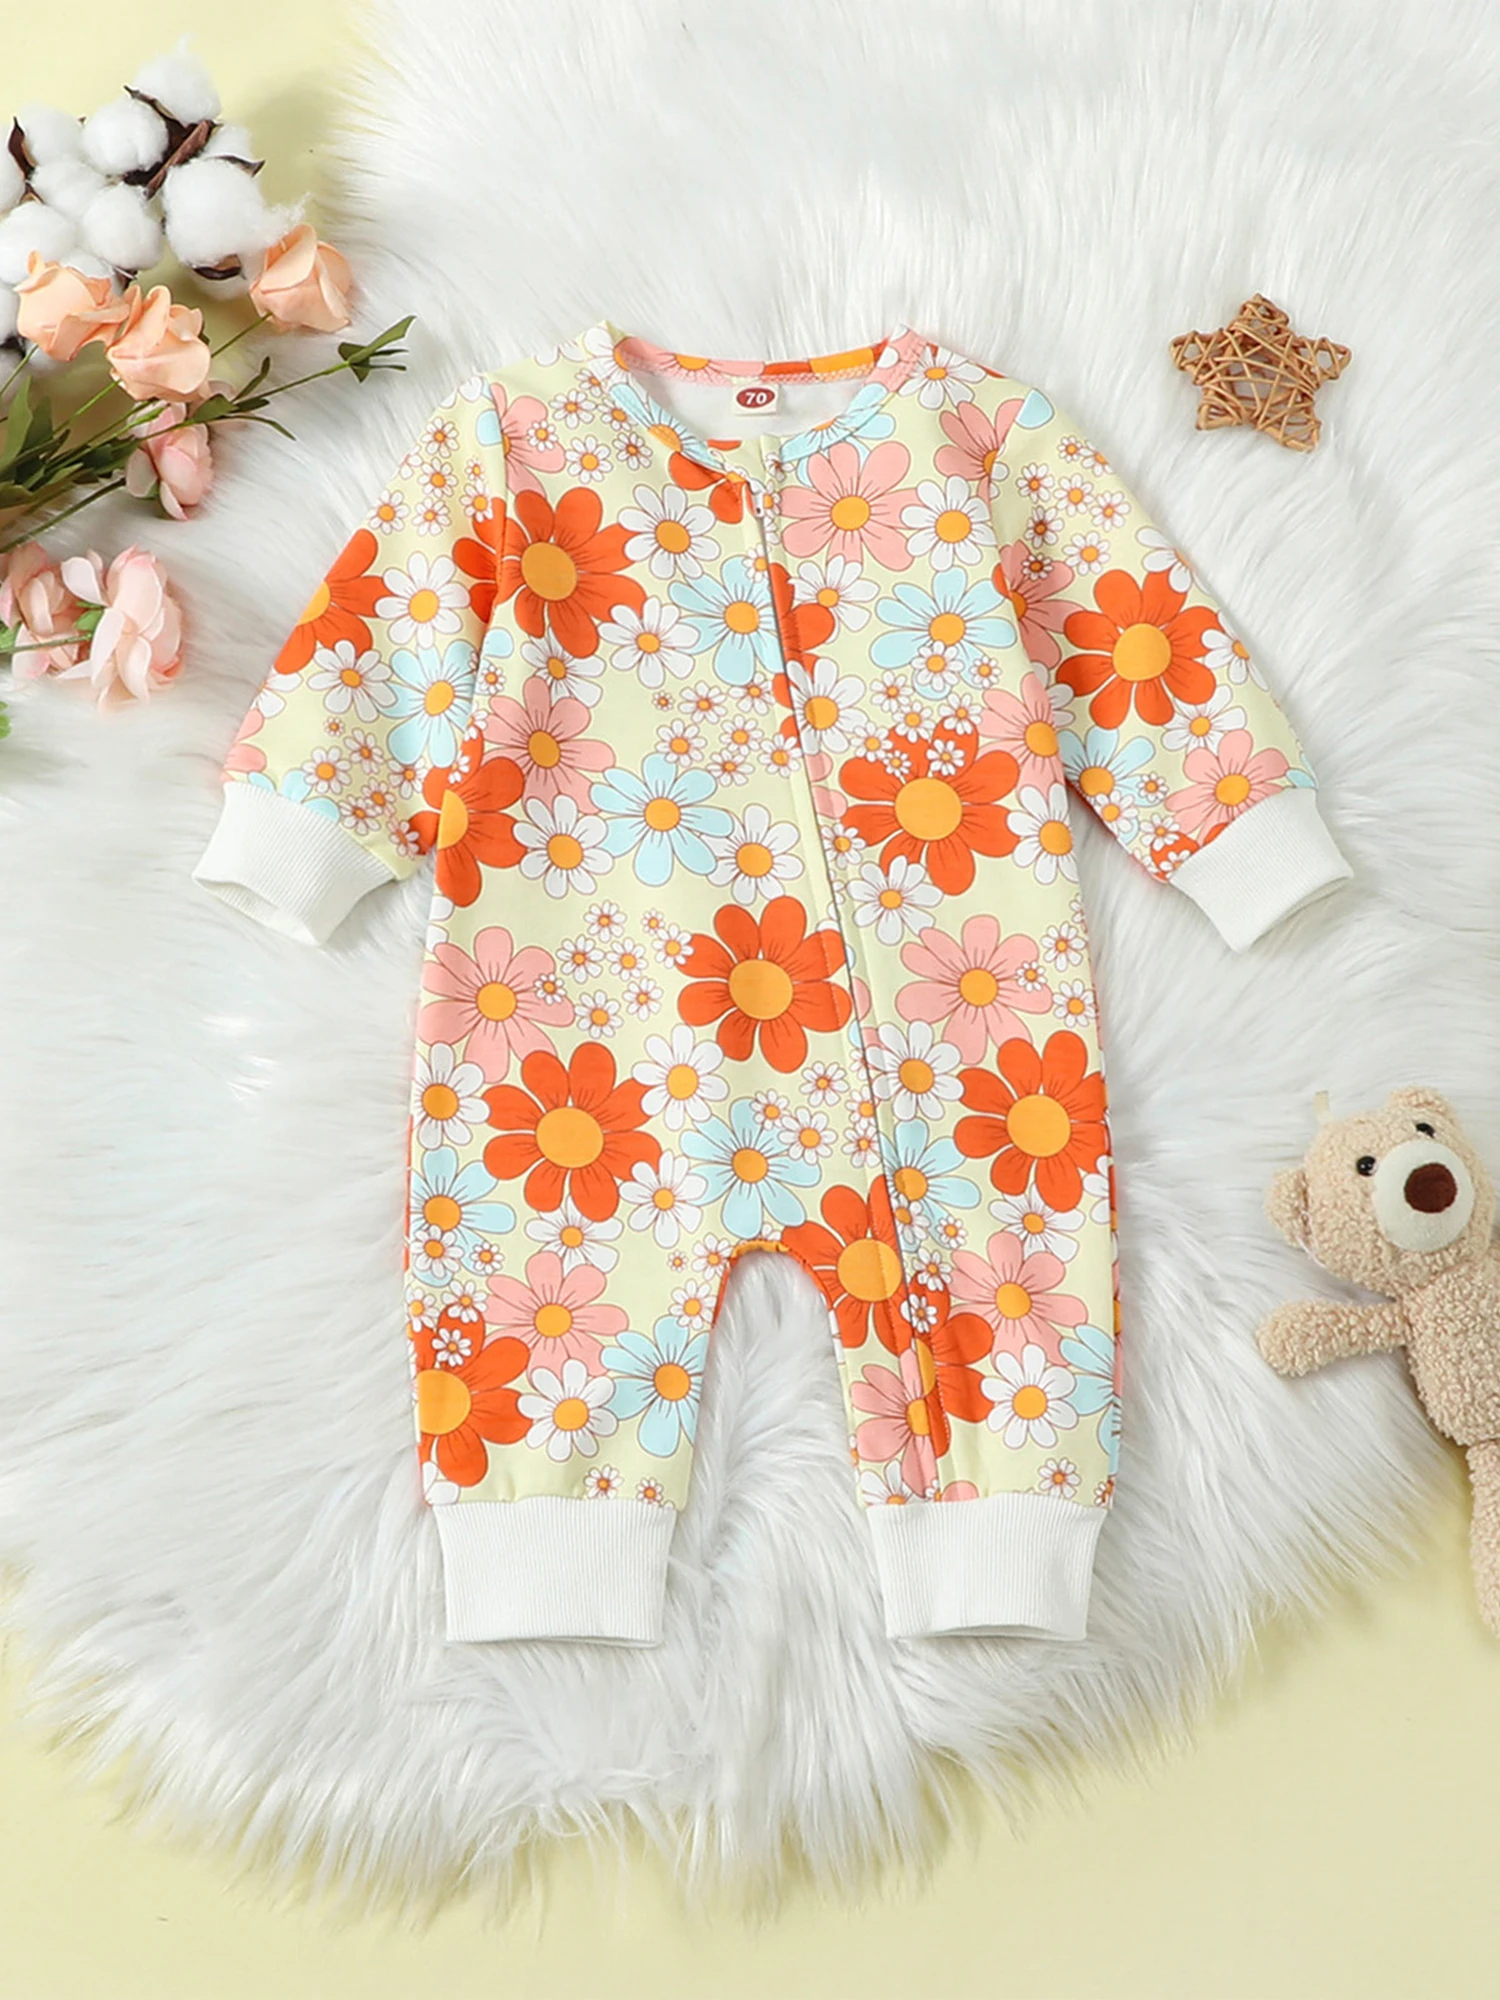 

Adorable Infant Strawberry Print Footless Pajama Romper with Zipper Closure and Long Sleeves for Cozy Nights - Perfect Newborn